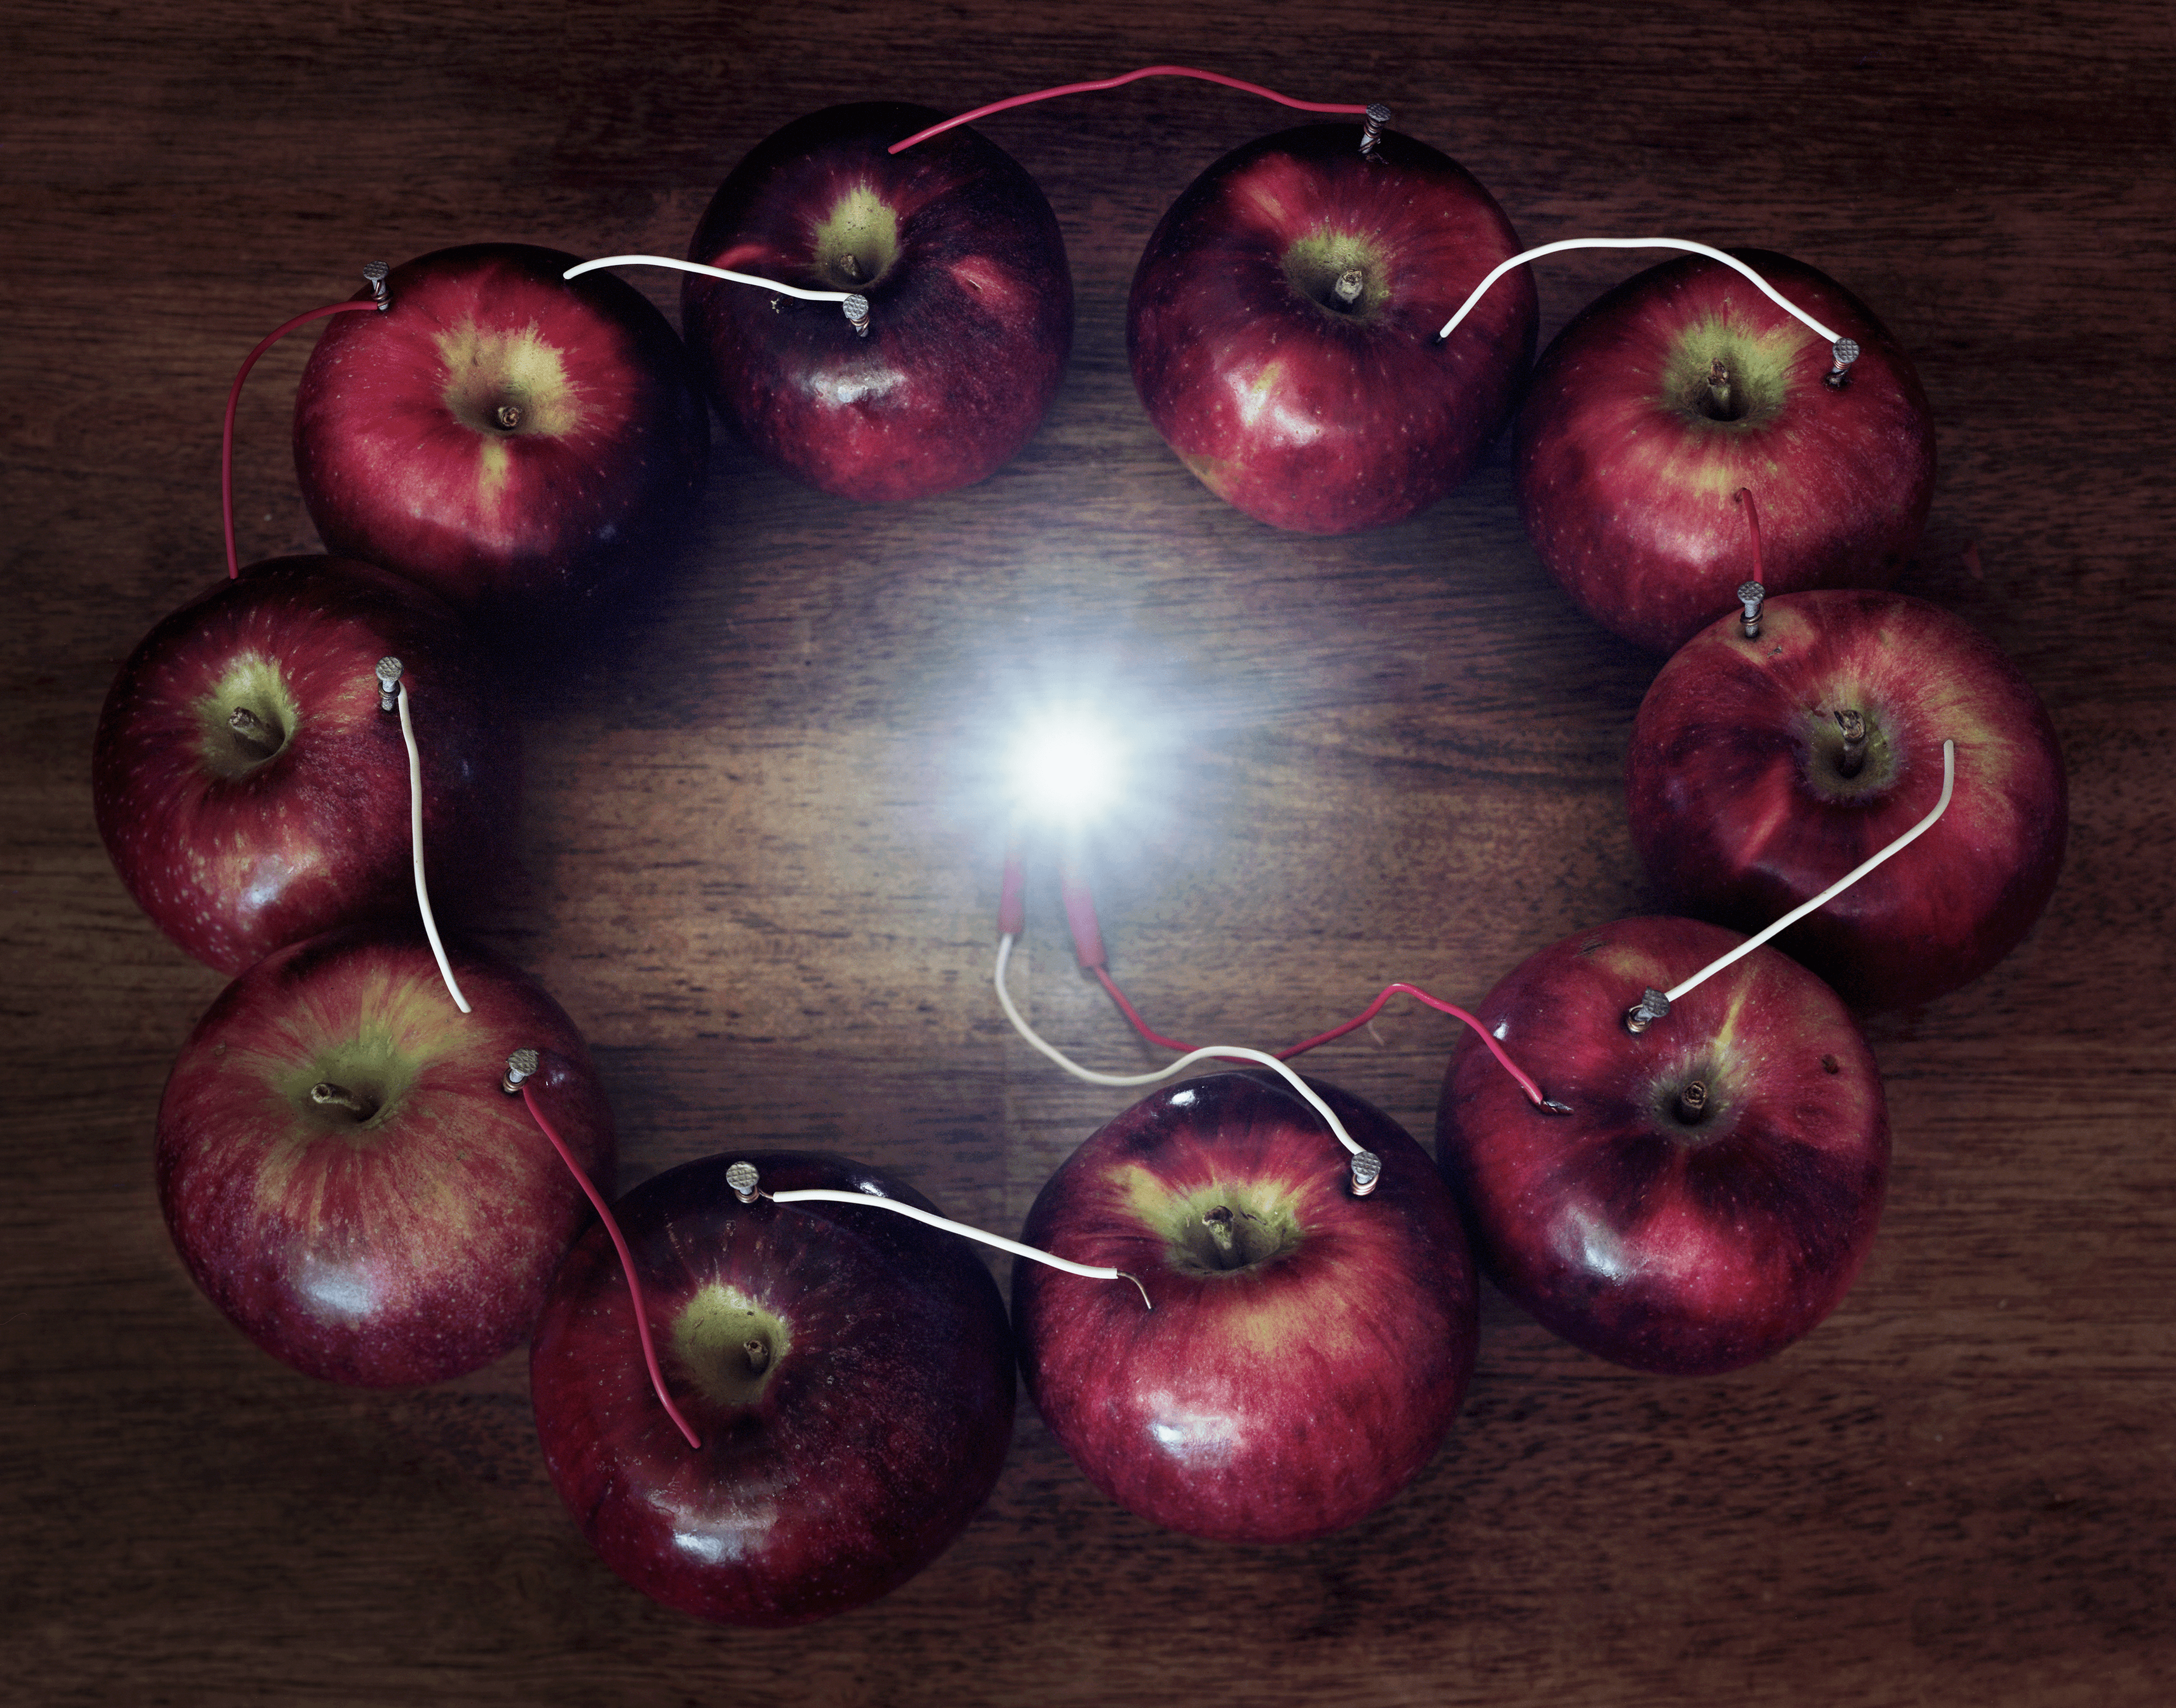 Back to Light - Electricity From a Ring of Apples, 2013